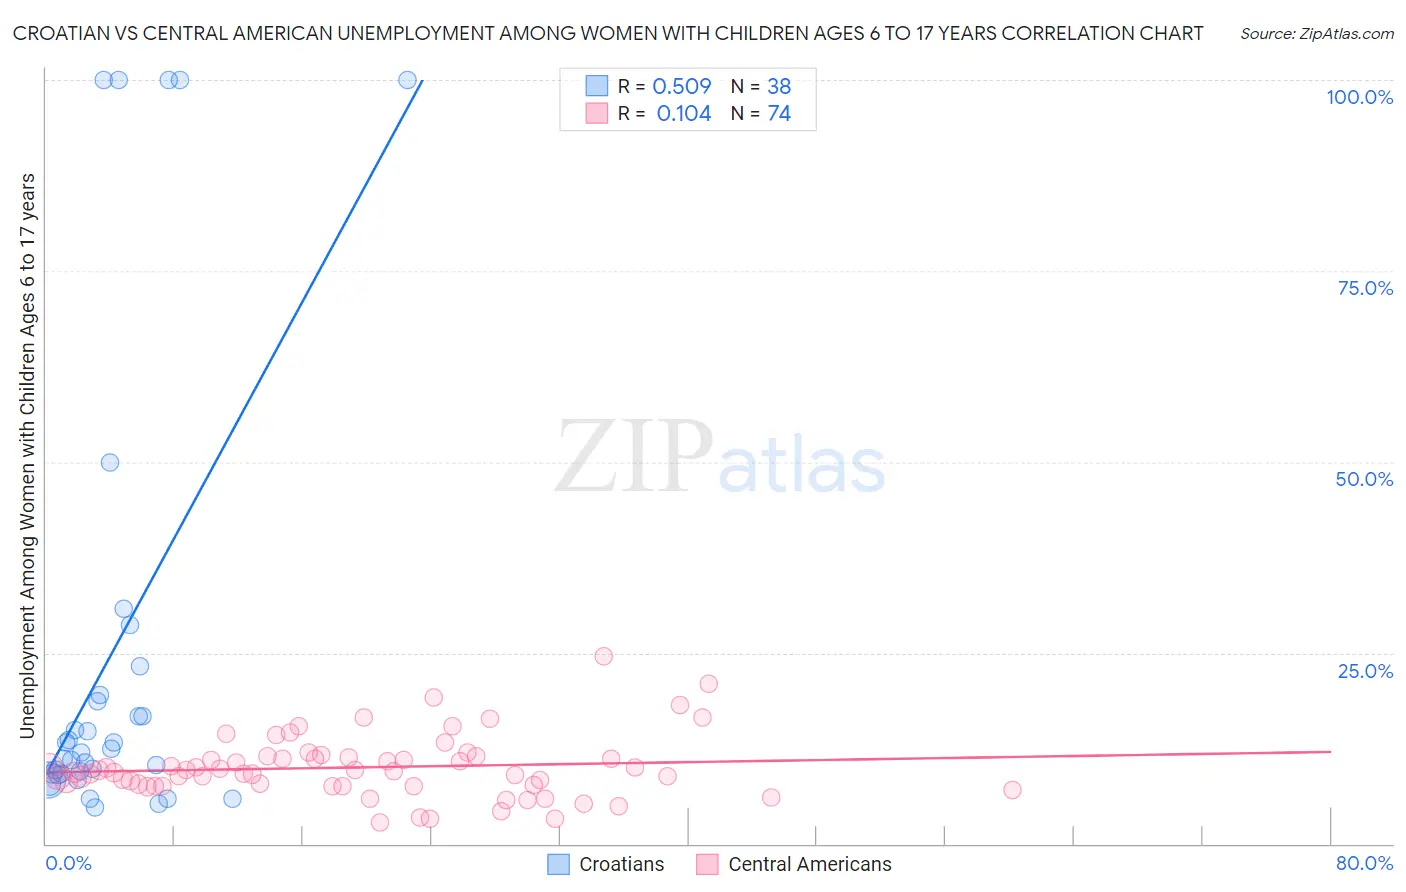 Croatian vs Central American Unemployment Among Women with Children Ages 6 to 17 years